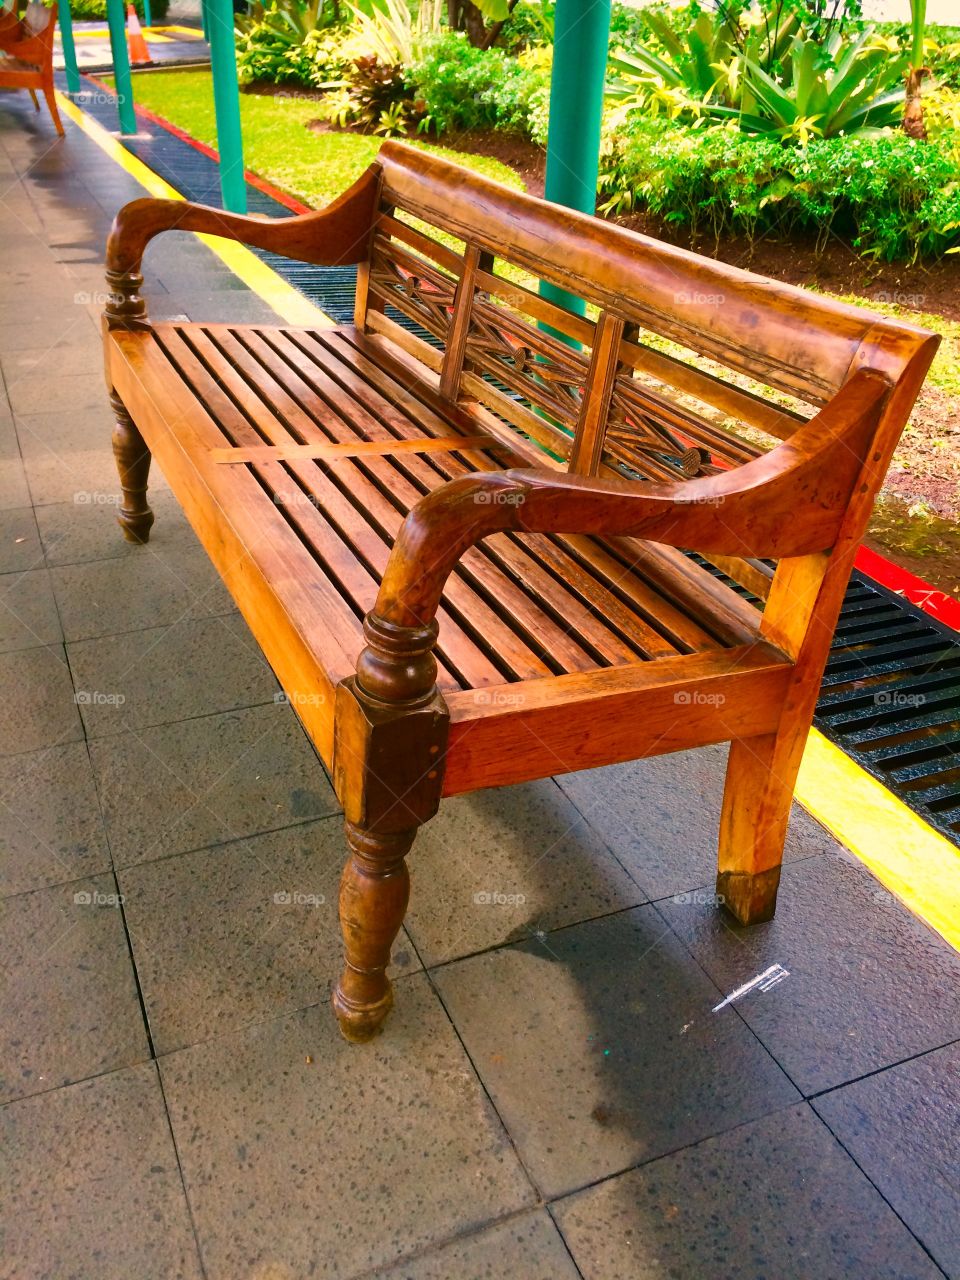 A park without benches is like an uninhabited forest. As small as the size of a park bench, this one equipment becomes important and must be in your home garden.

No need to be fancy and expensive, 4,Nov,2019 indonesia